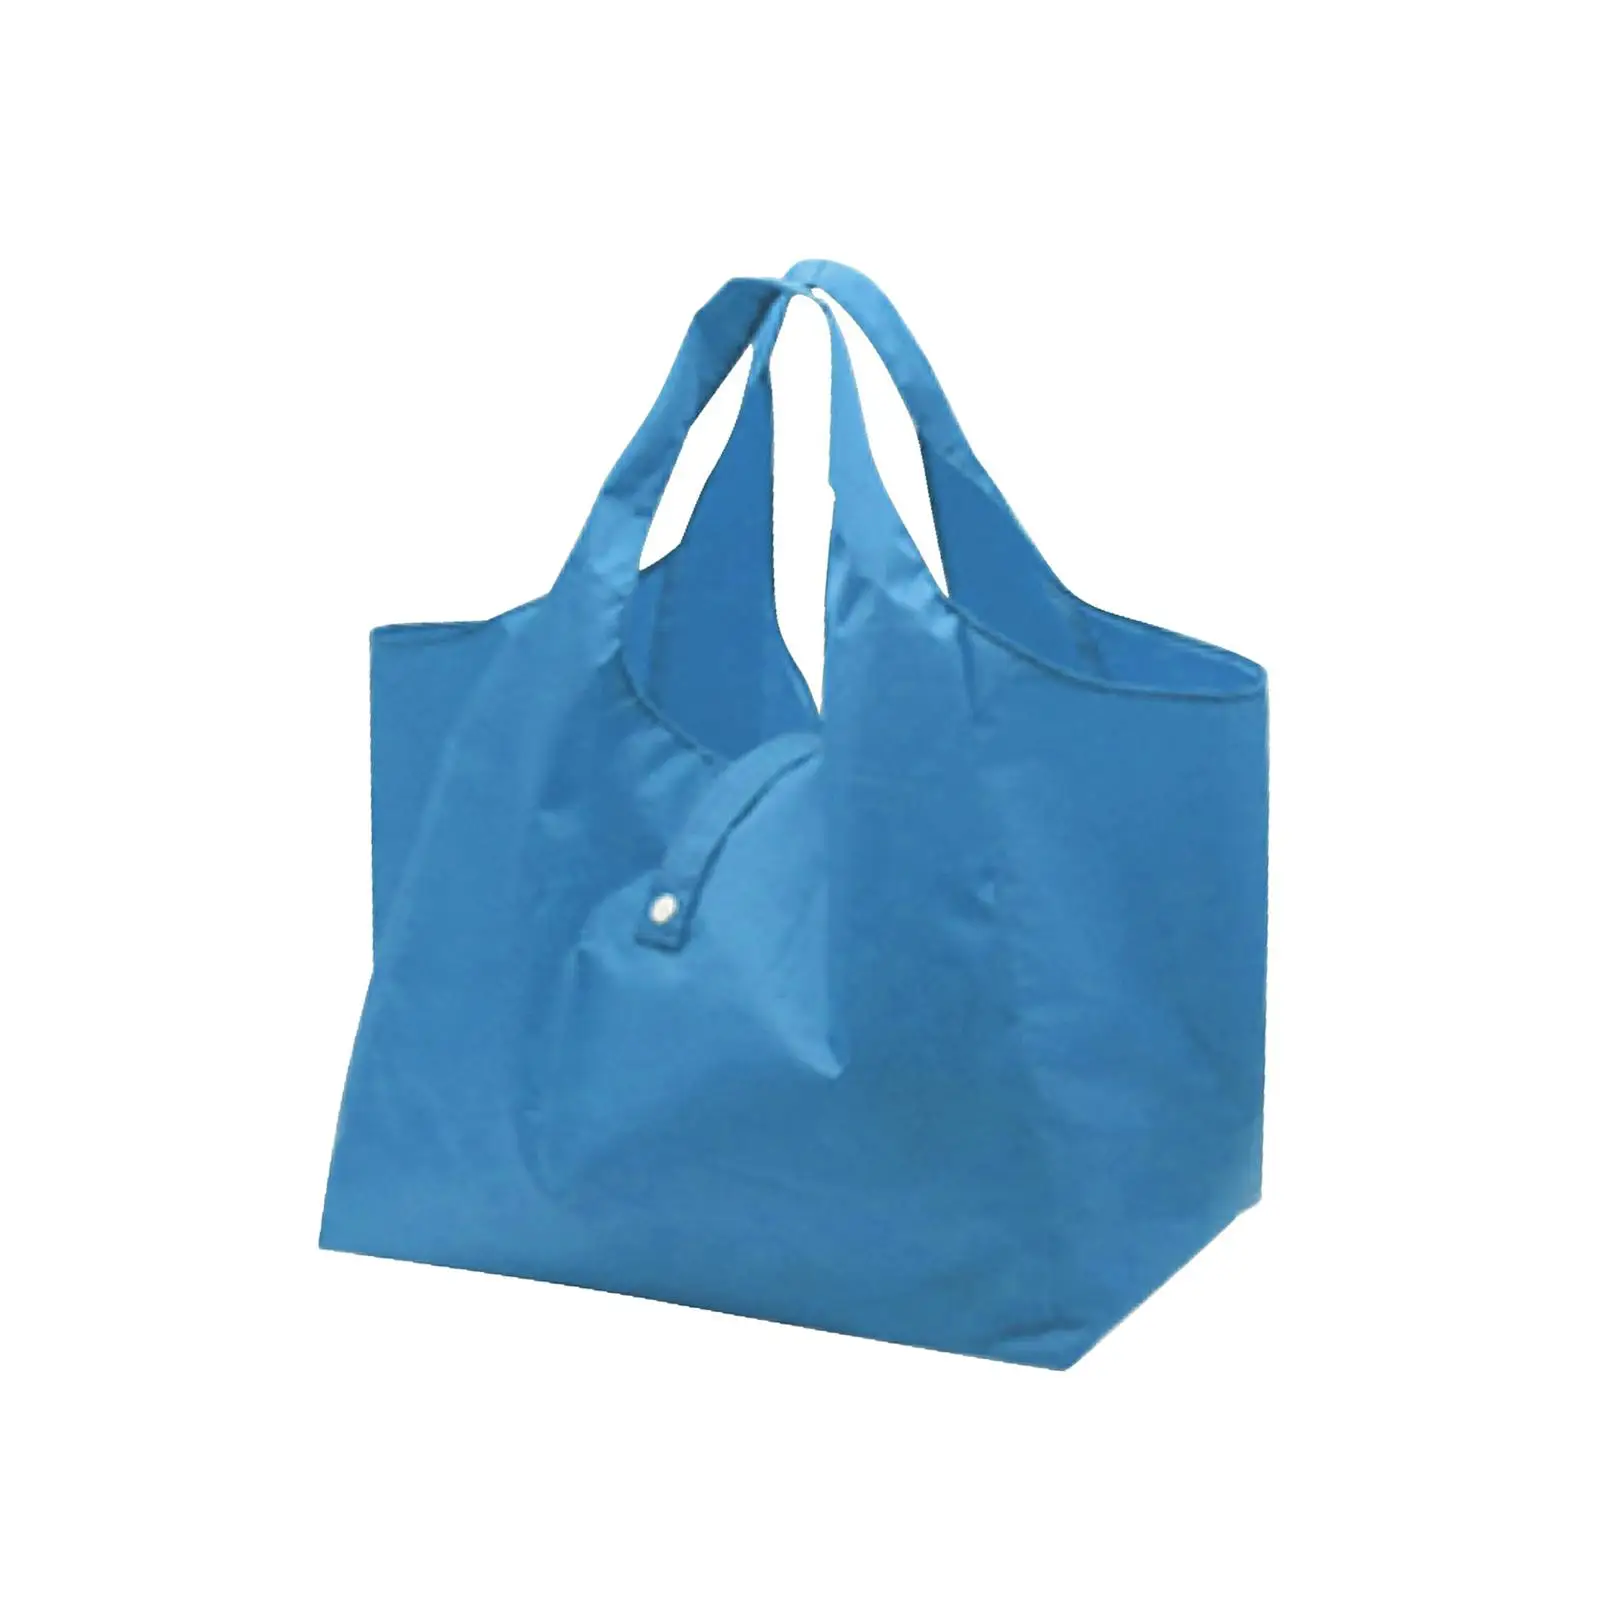 Reusable Shopping Grocery Bag Foldable, Washable, Large Capacity, Heavy Duty Tote, Eco Friendly Purse Bag Fits in Pocket